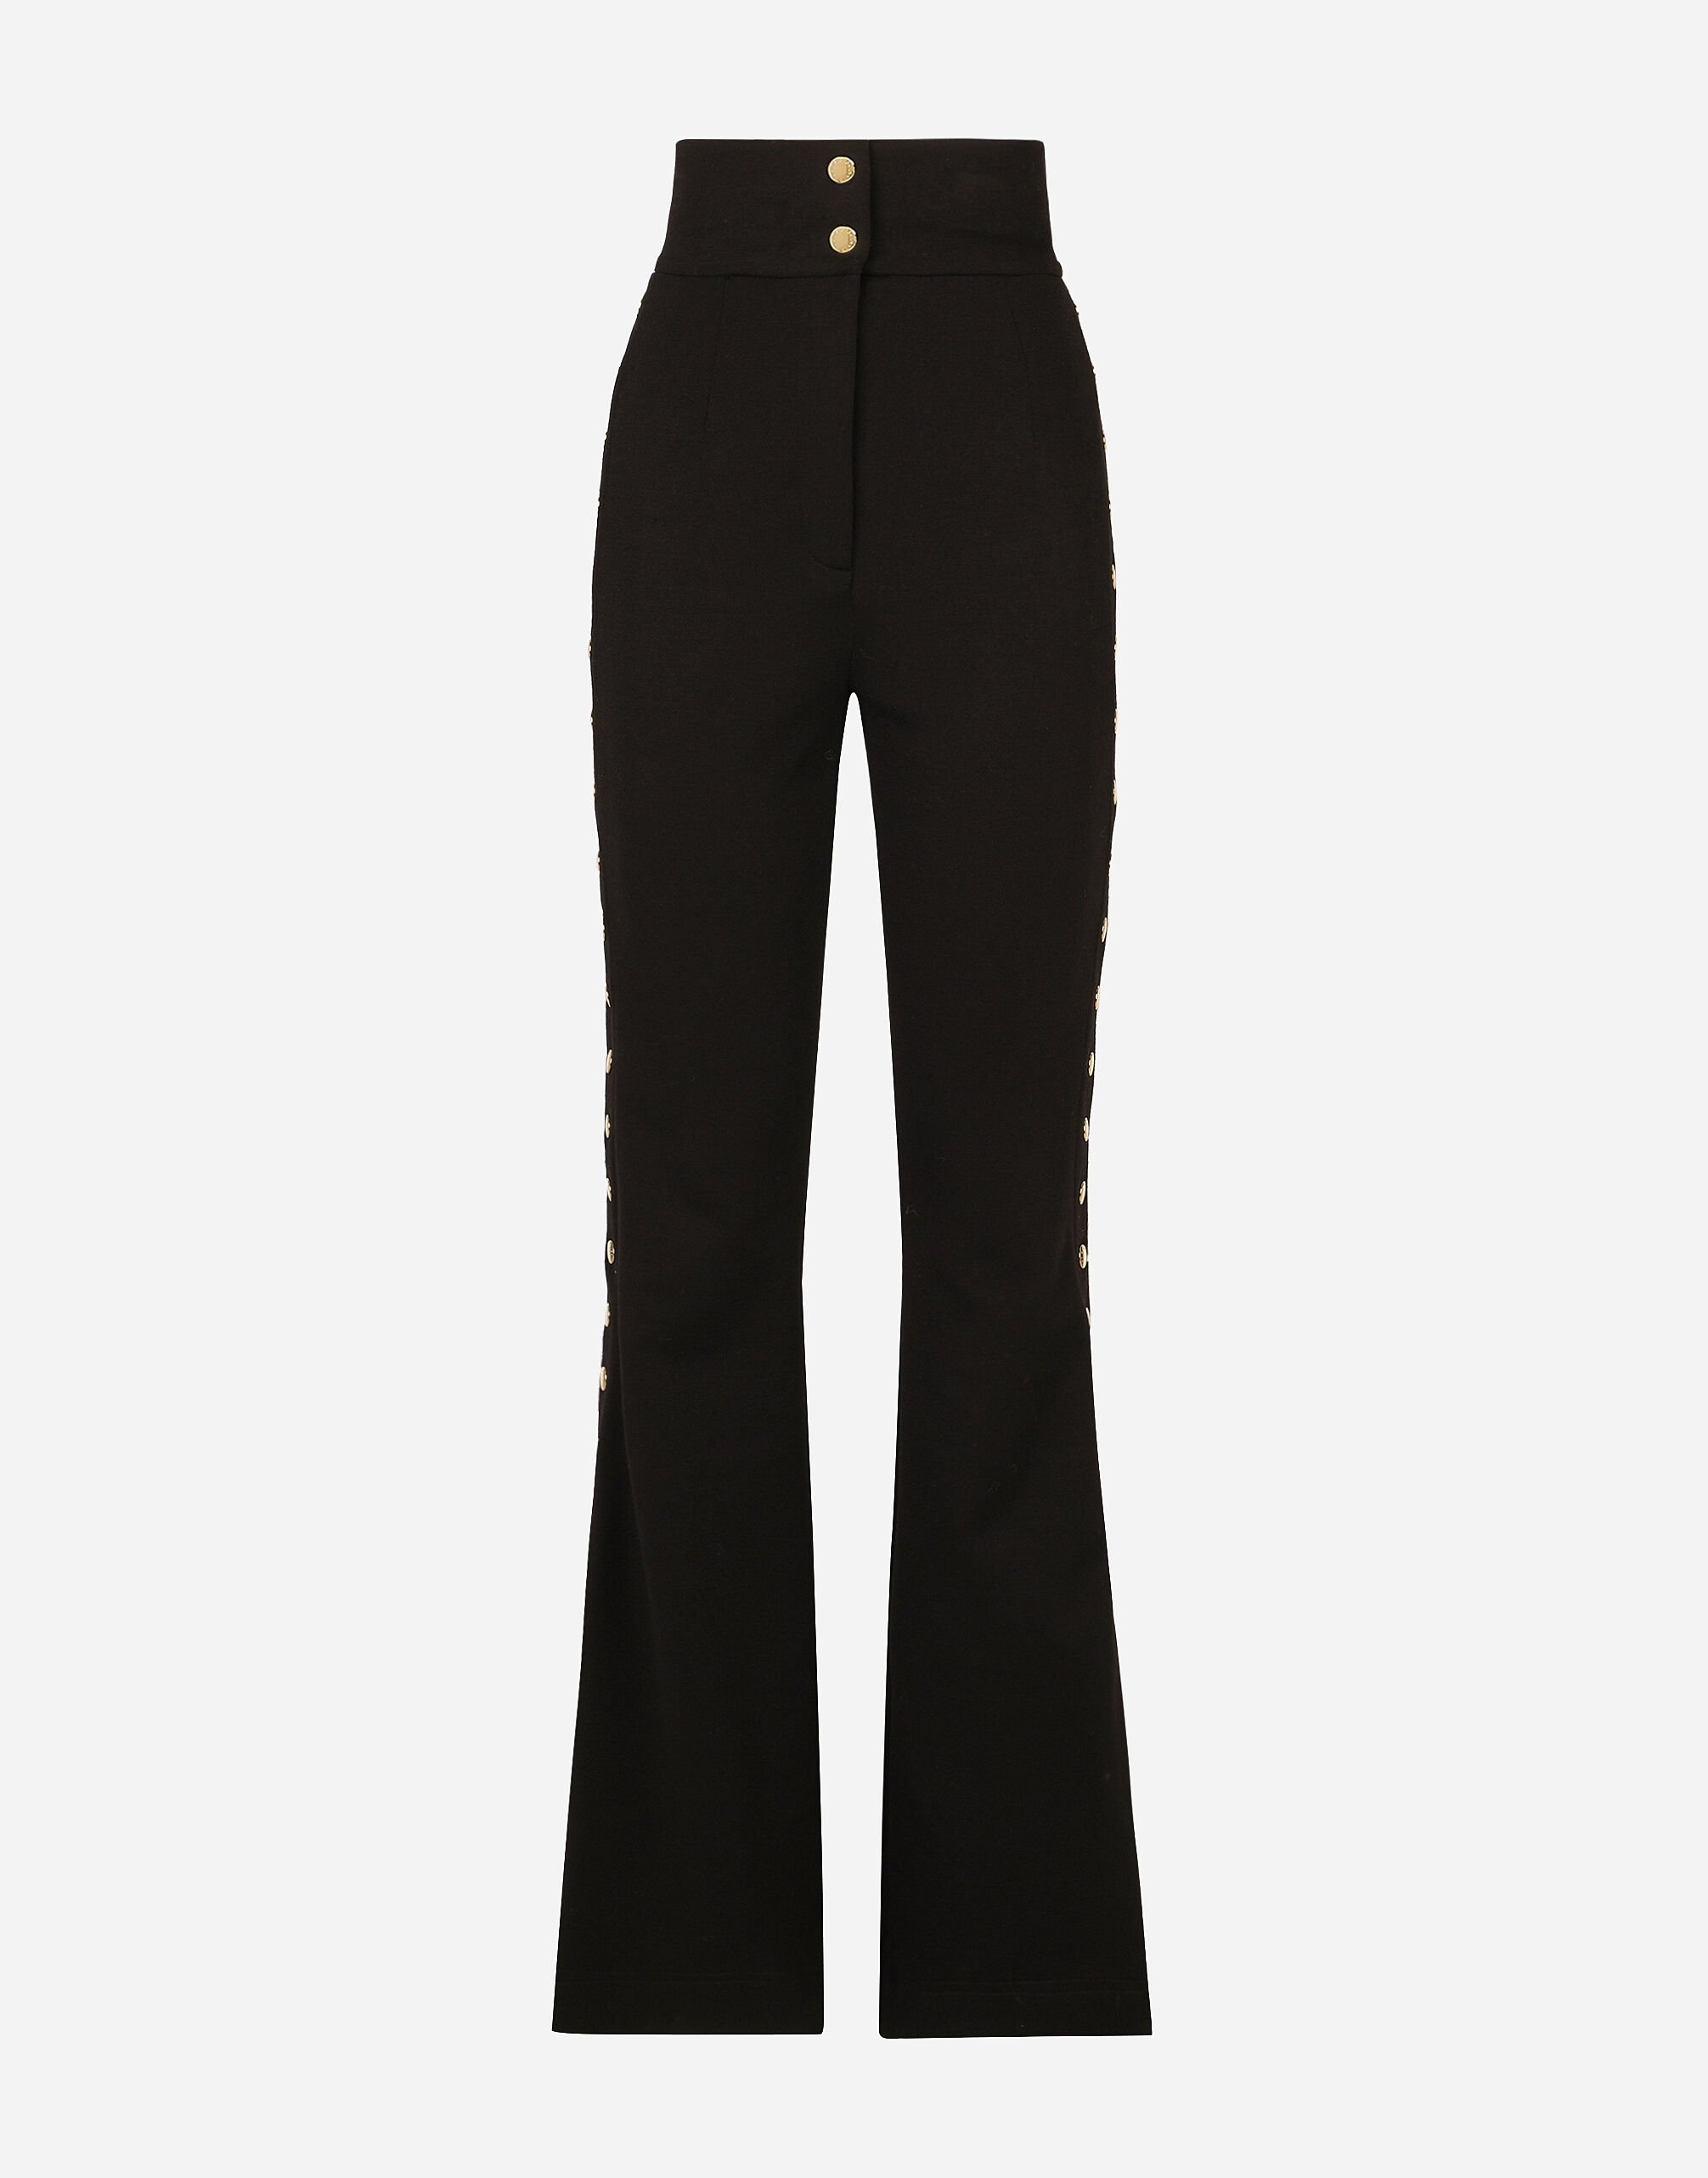 Full Milano pants with buttons down the side in Black for ...